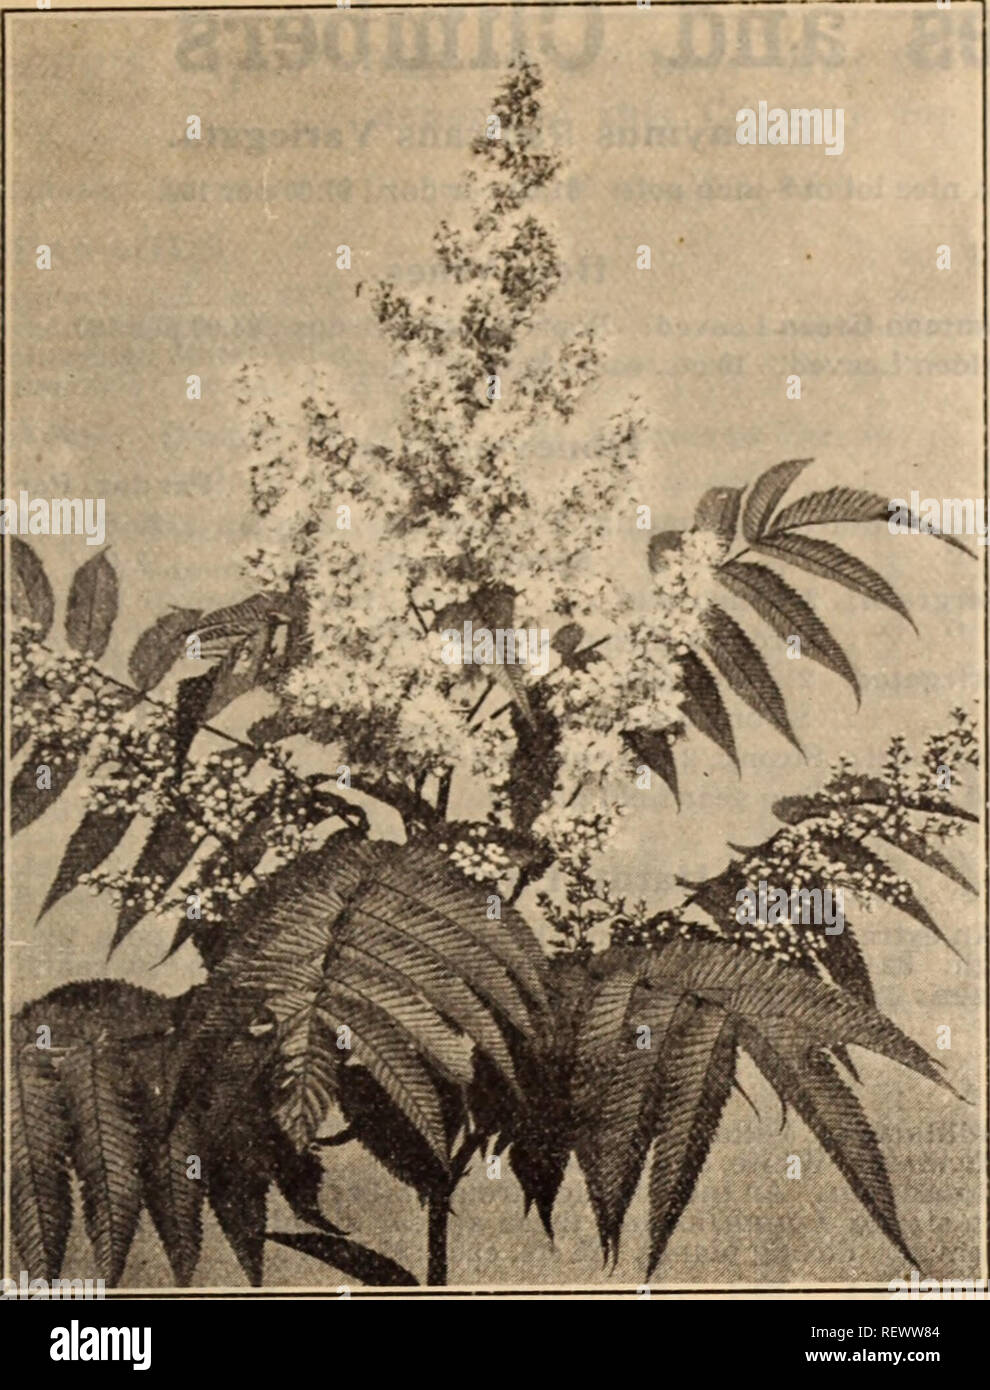 . Dreer's wholesale price list / Henry A. Dreer.. Nursery Catalogue. HENRY A. DREER. PHILADELPHIA, PA . WHOLESALE PRICE LIST 55. spir.^&lt;:a sorbifolia stellipeda Rhododendron Punctatum. A distinct native species of compact spreading habit, splendid for exposed positions, being absolutely hardy, producing masses of medium sized purplish-rose colored flowers. 75 cts each. Golden Variegated Privet. (Ligustrum Ovalifolium Aureum.) A fine lot of bushy plants of this useful, ornamental, golden variegated shrub, 18 inches high. 12.00 per doz.; $15.00 per 100. New Spiraea Bumaldi &quot;Walluf.&quot; Stock Photo